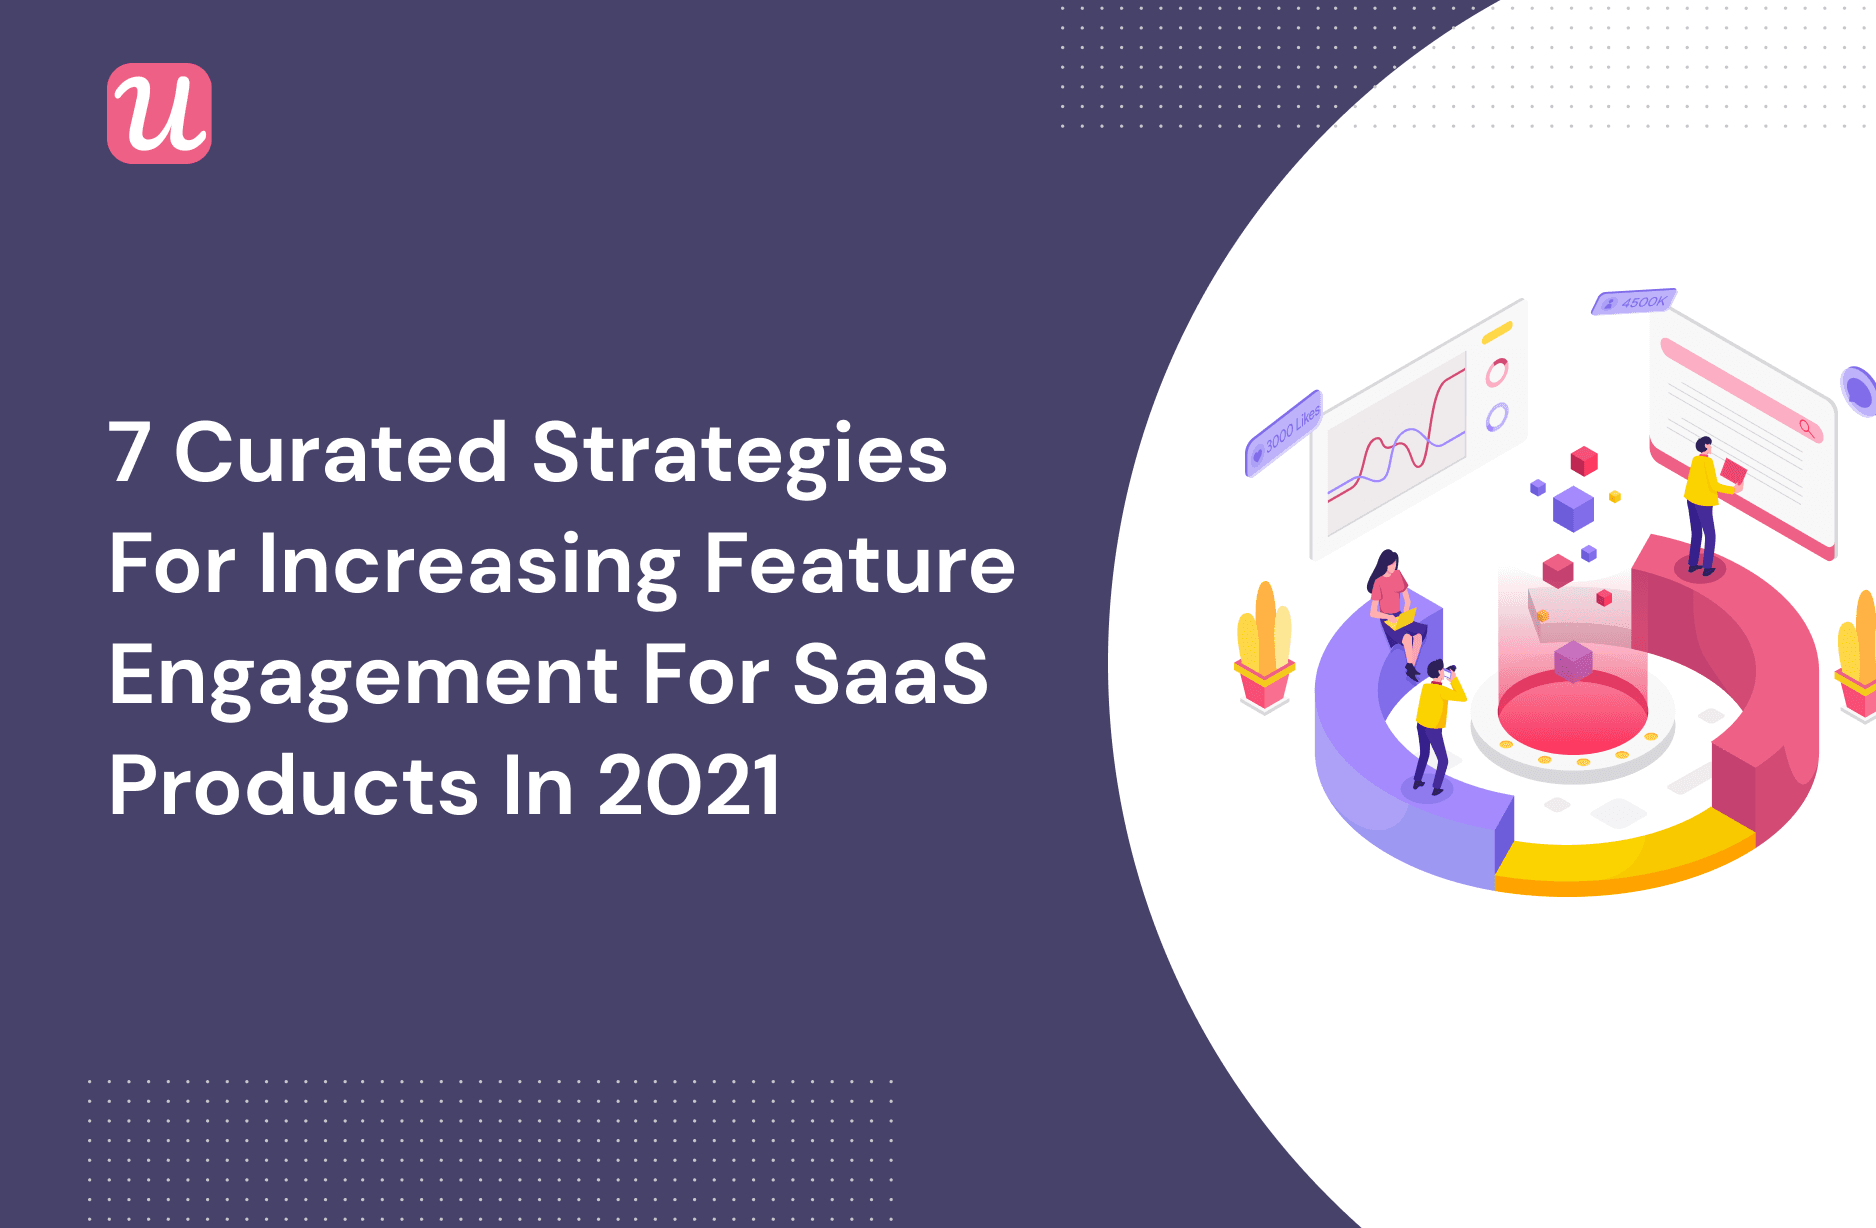 7 Curated Strategies For Increasing Feature Engagement For SaaS Products In 2021